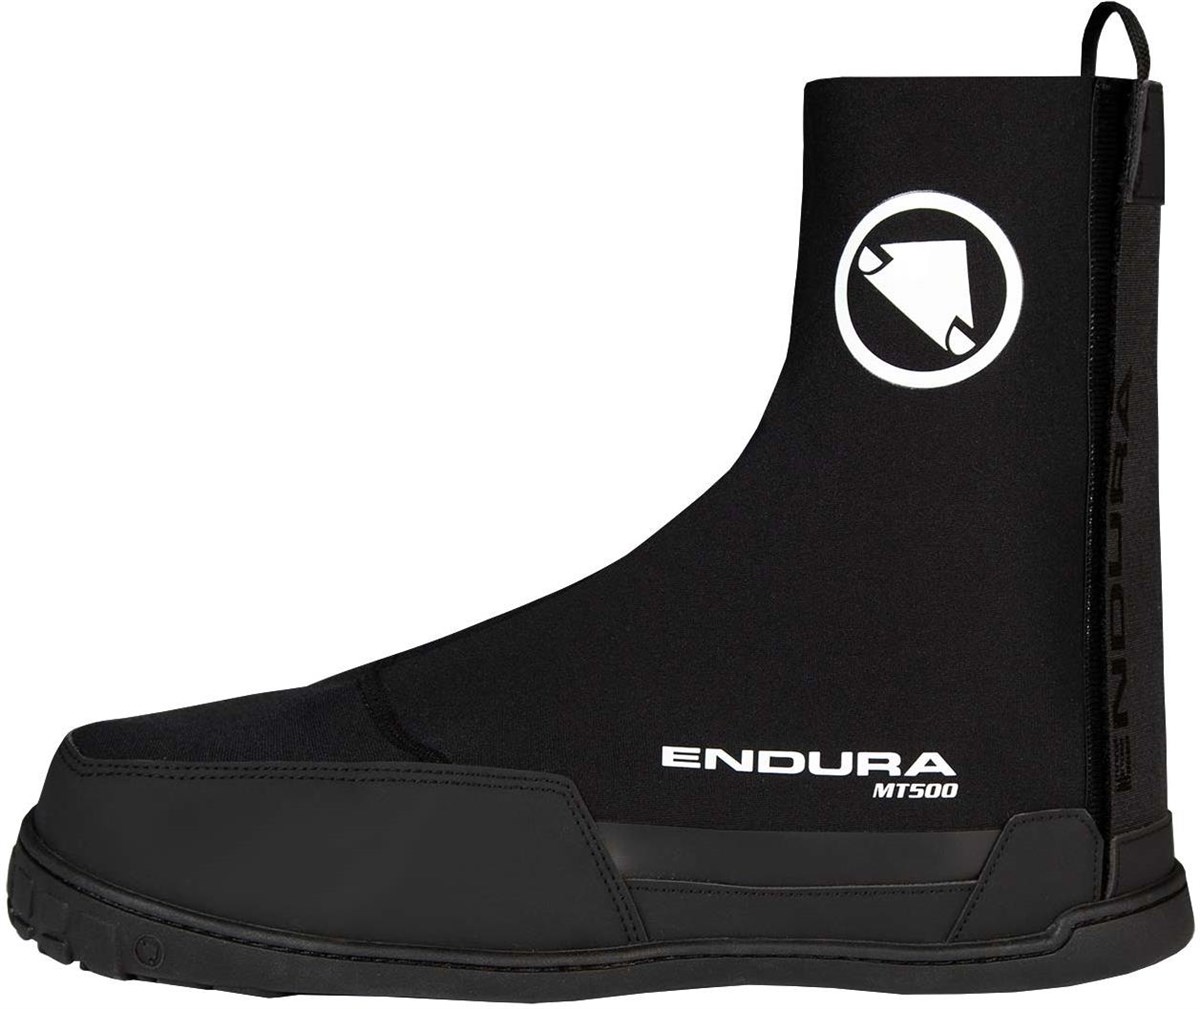 Endura MT500 Plus Overshoes II For Flat Pedals product image